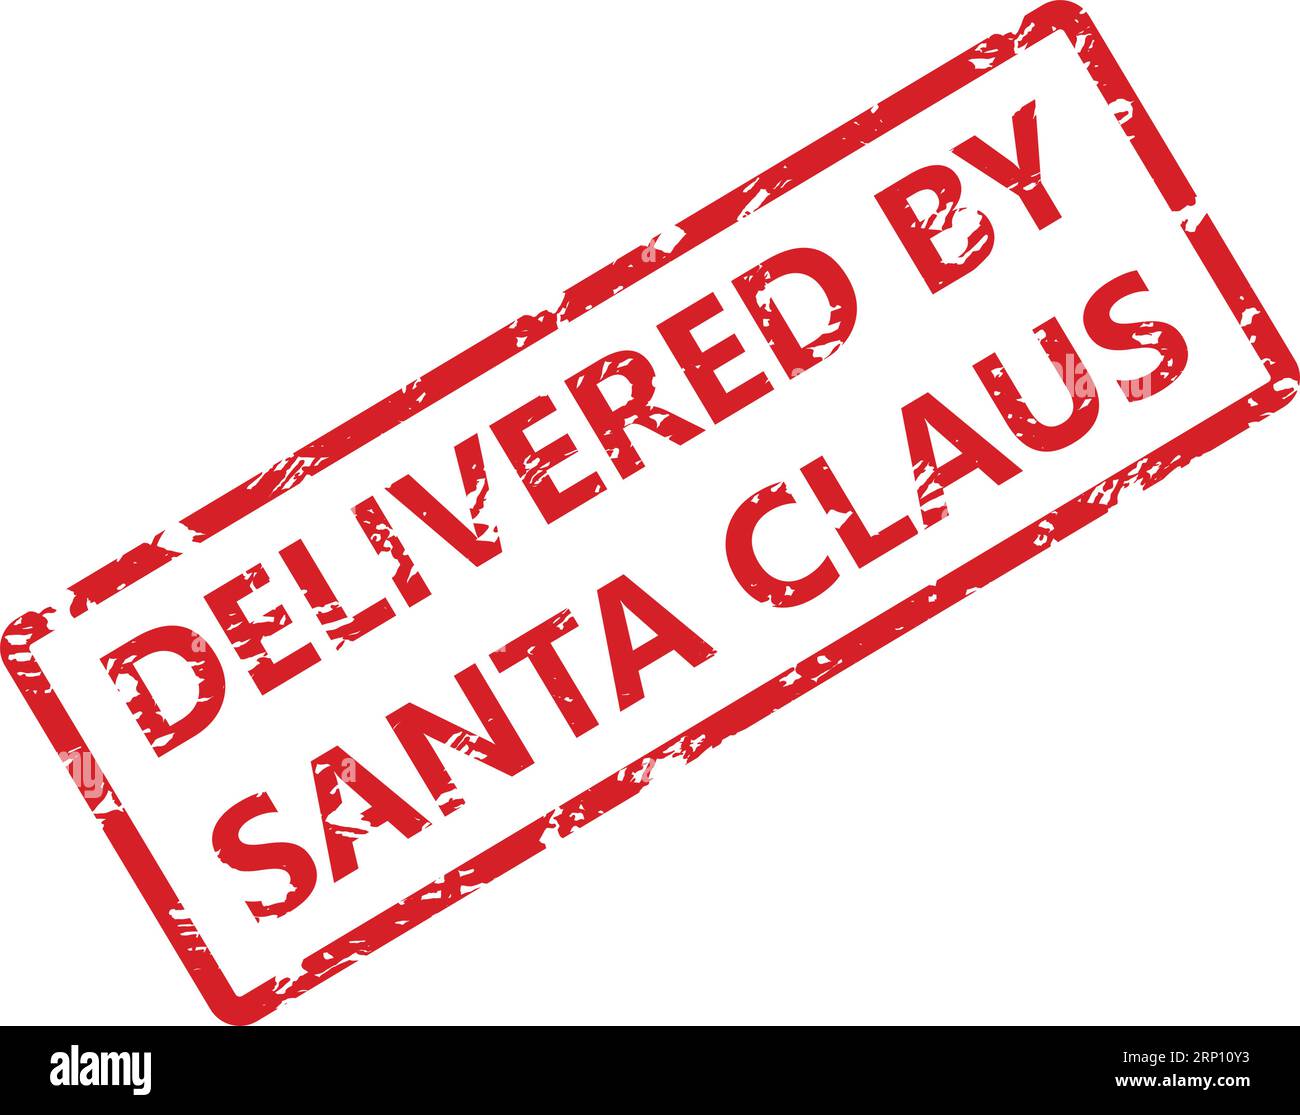 Santa claus post stamp christmas mail letter Vector Image